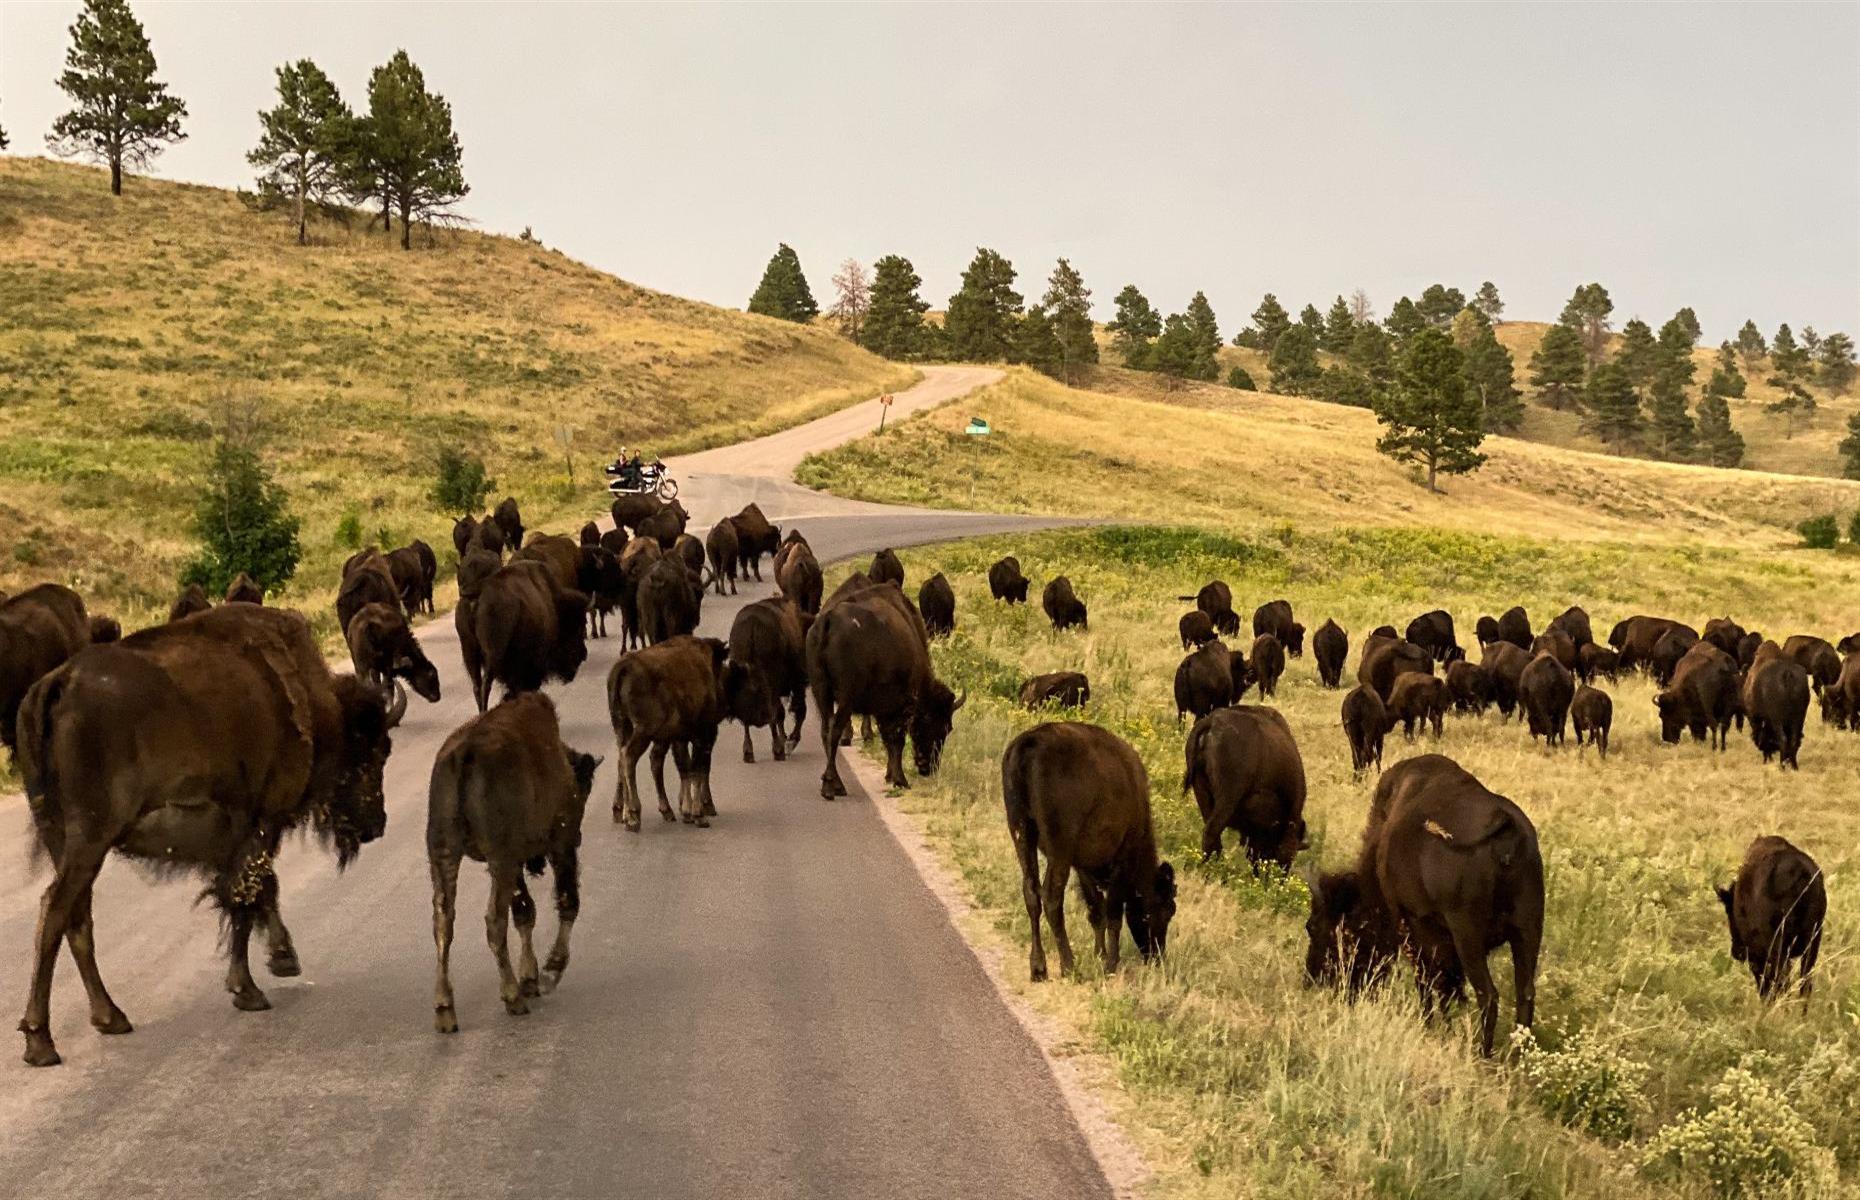 <p>Located in the Black Hills, this sprawling, 71,000 acre state park is home to roaming wildlife: expect buffalo to stroll past your car, especially if you drive the 19-mile Wildlife Loop Road in the southeastern section of the park. If you plan your visit for the end of September, you may witness the annual Buffalo Roundup, featuring rangers and wranglers herding more than 1,000 bison. For an even more immersive off-road experience, sign up for a Buffalo Safari Jeep Tour, with a guide’s knowledge enhancing your enjoyment of the park.</p>